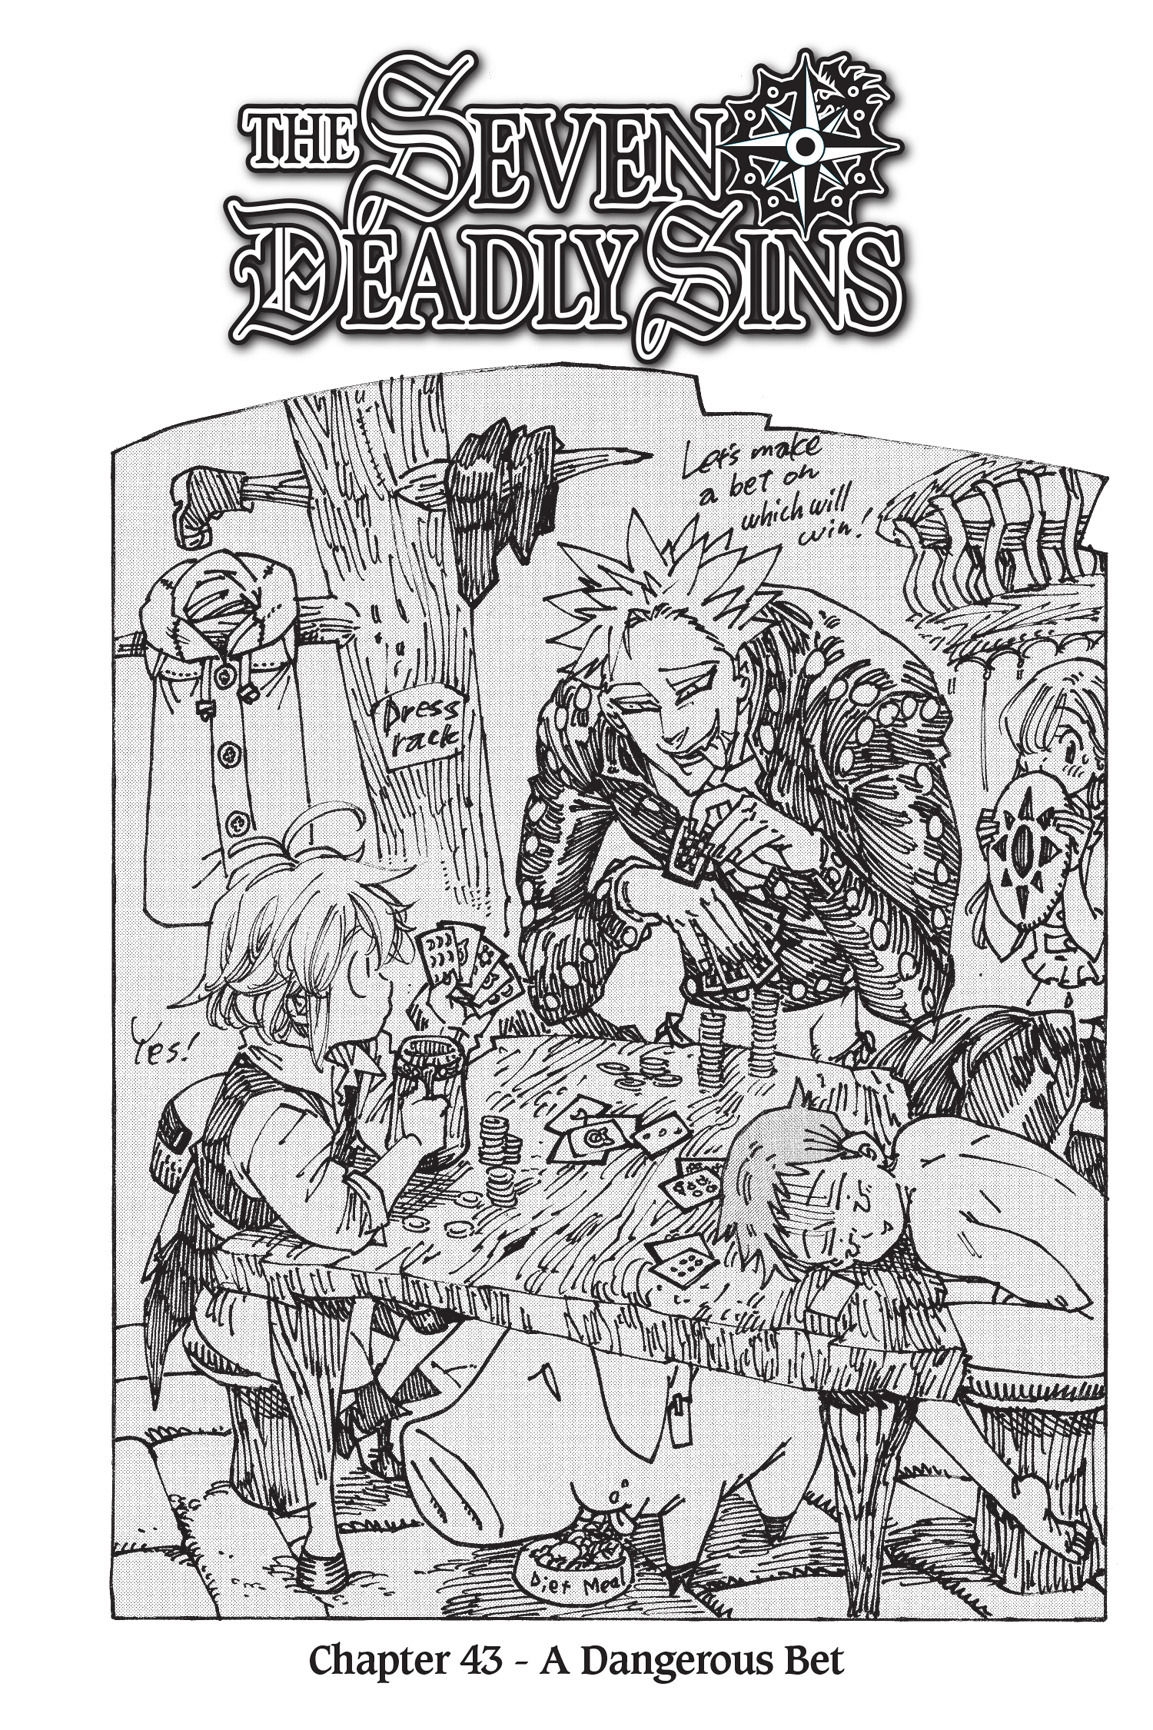 The Seven Deadly Sins (Covers & Chapter Title Cards) 62